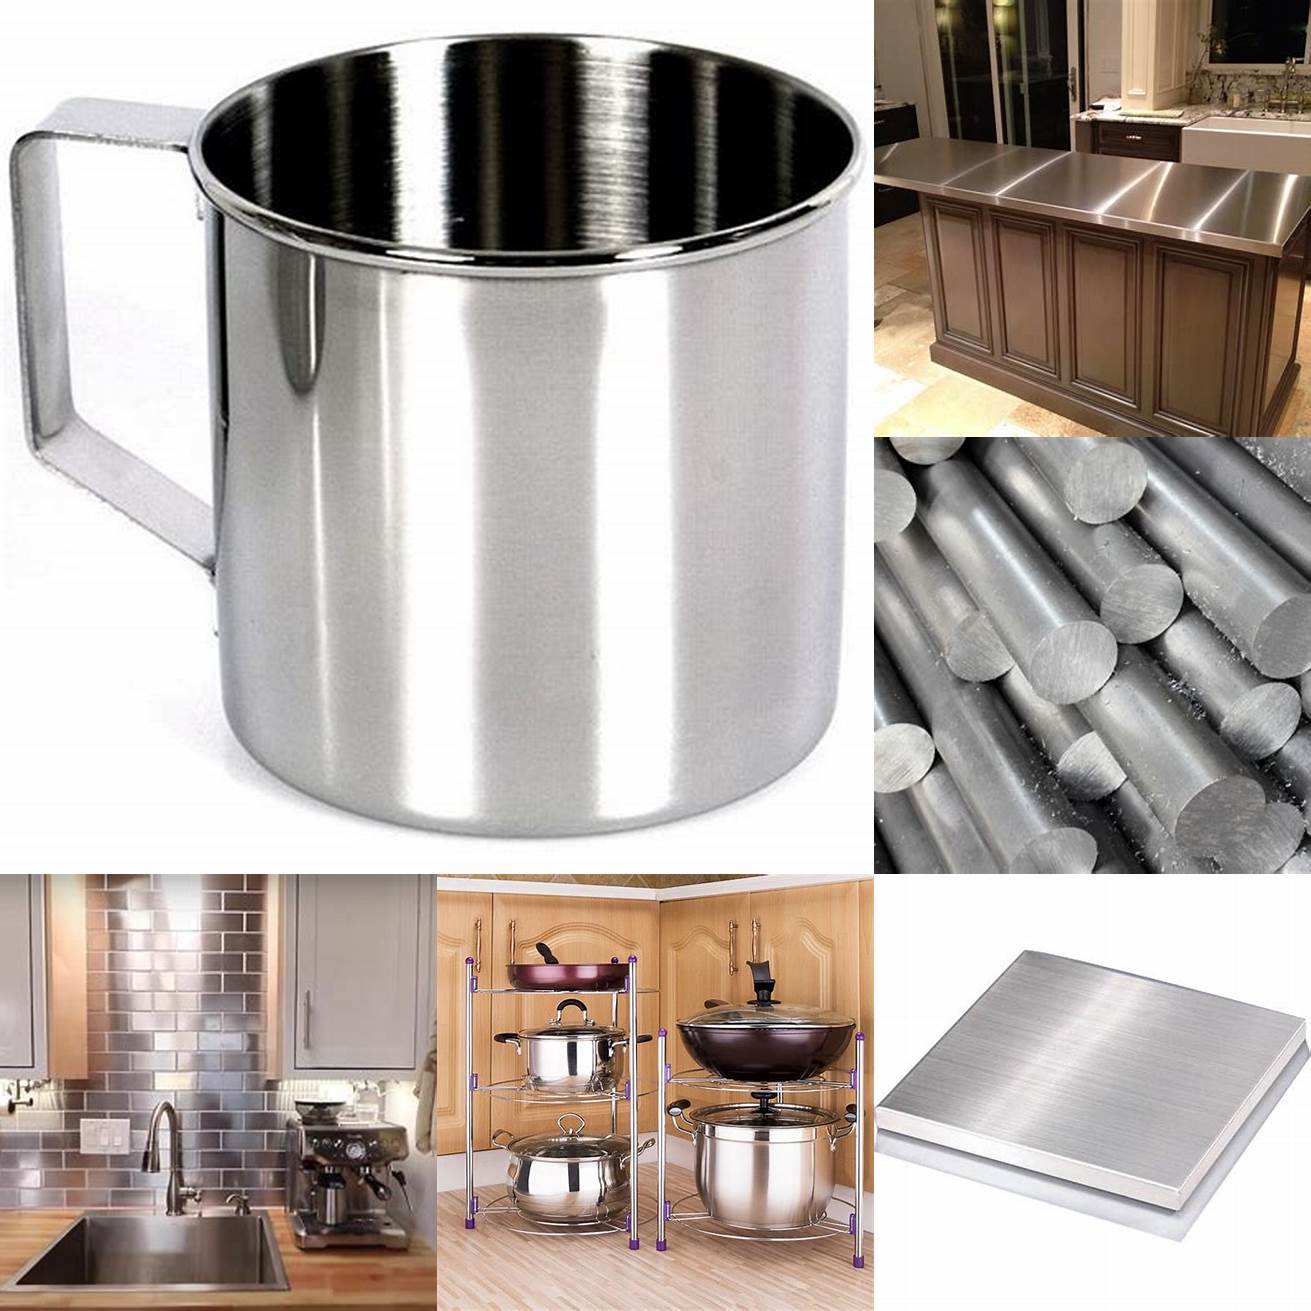 Durable Stainless steel is a highly durable material that can withstand heavy use and abuse in the kitchen